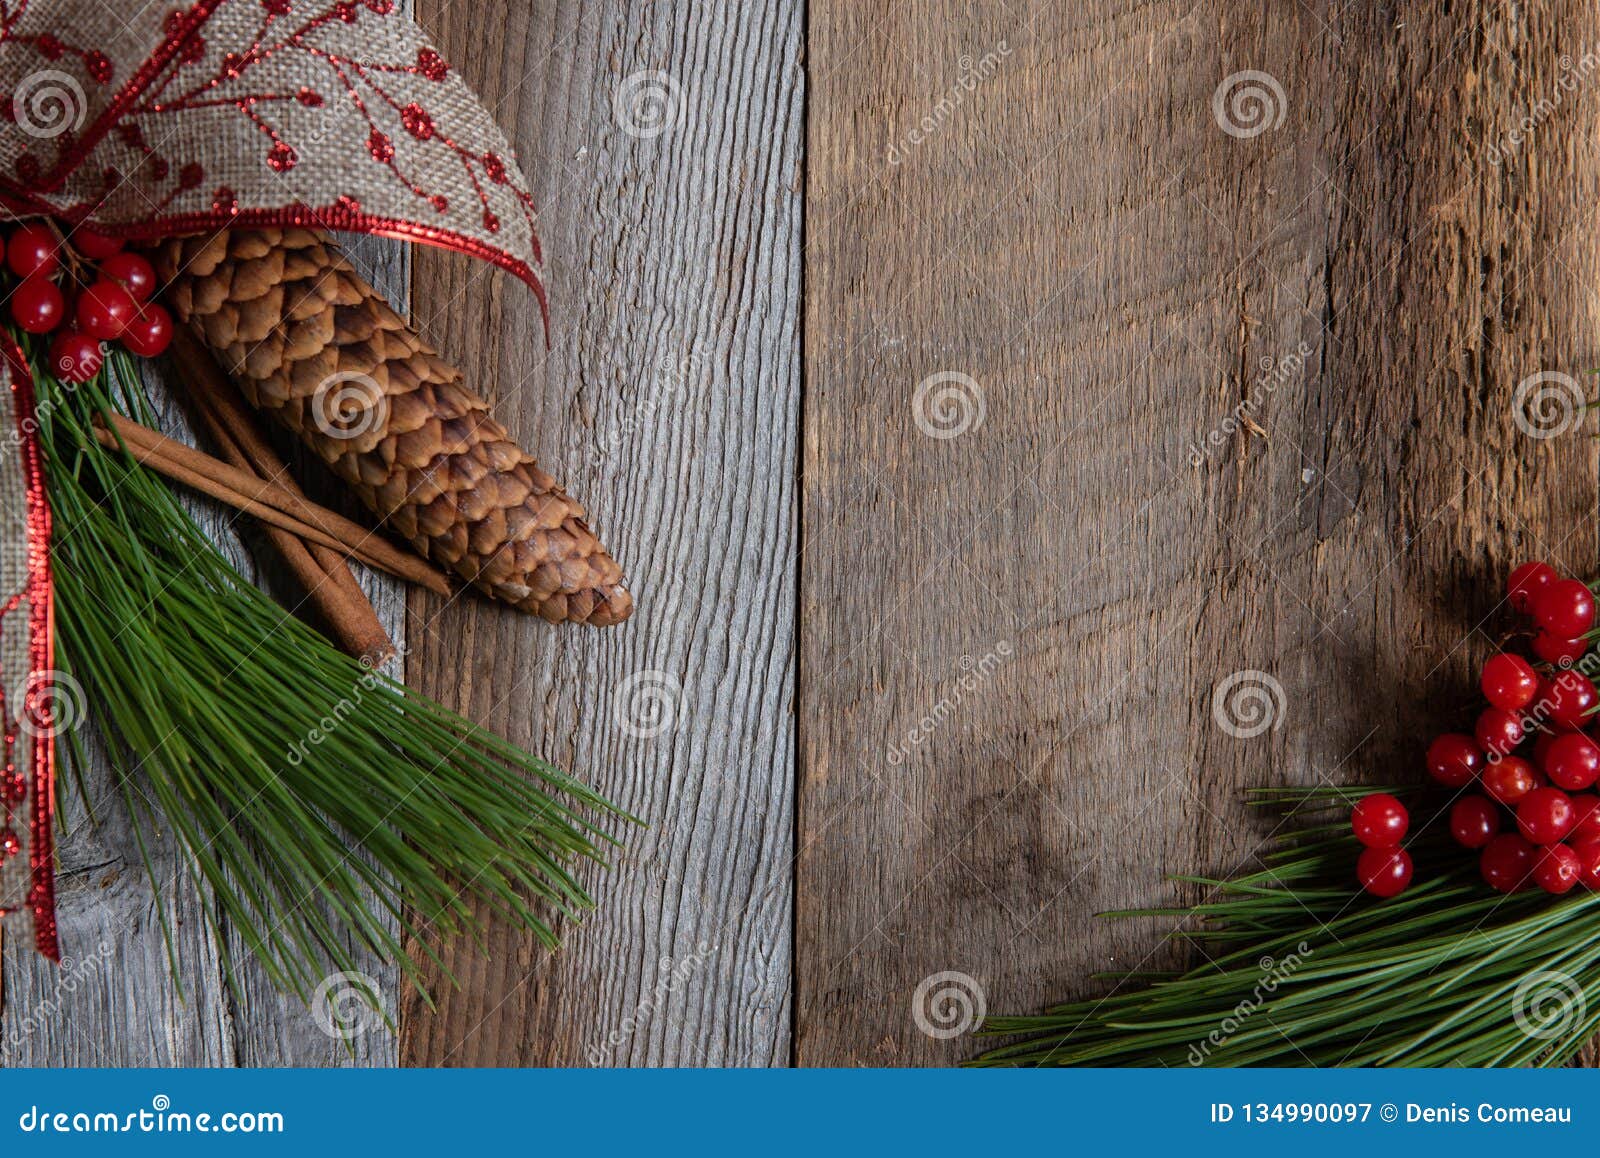 Authentic and Rustic Christmas Holiday Decorations on Weathered Wood ...